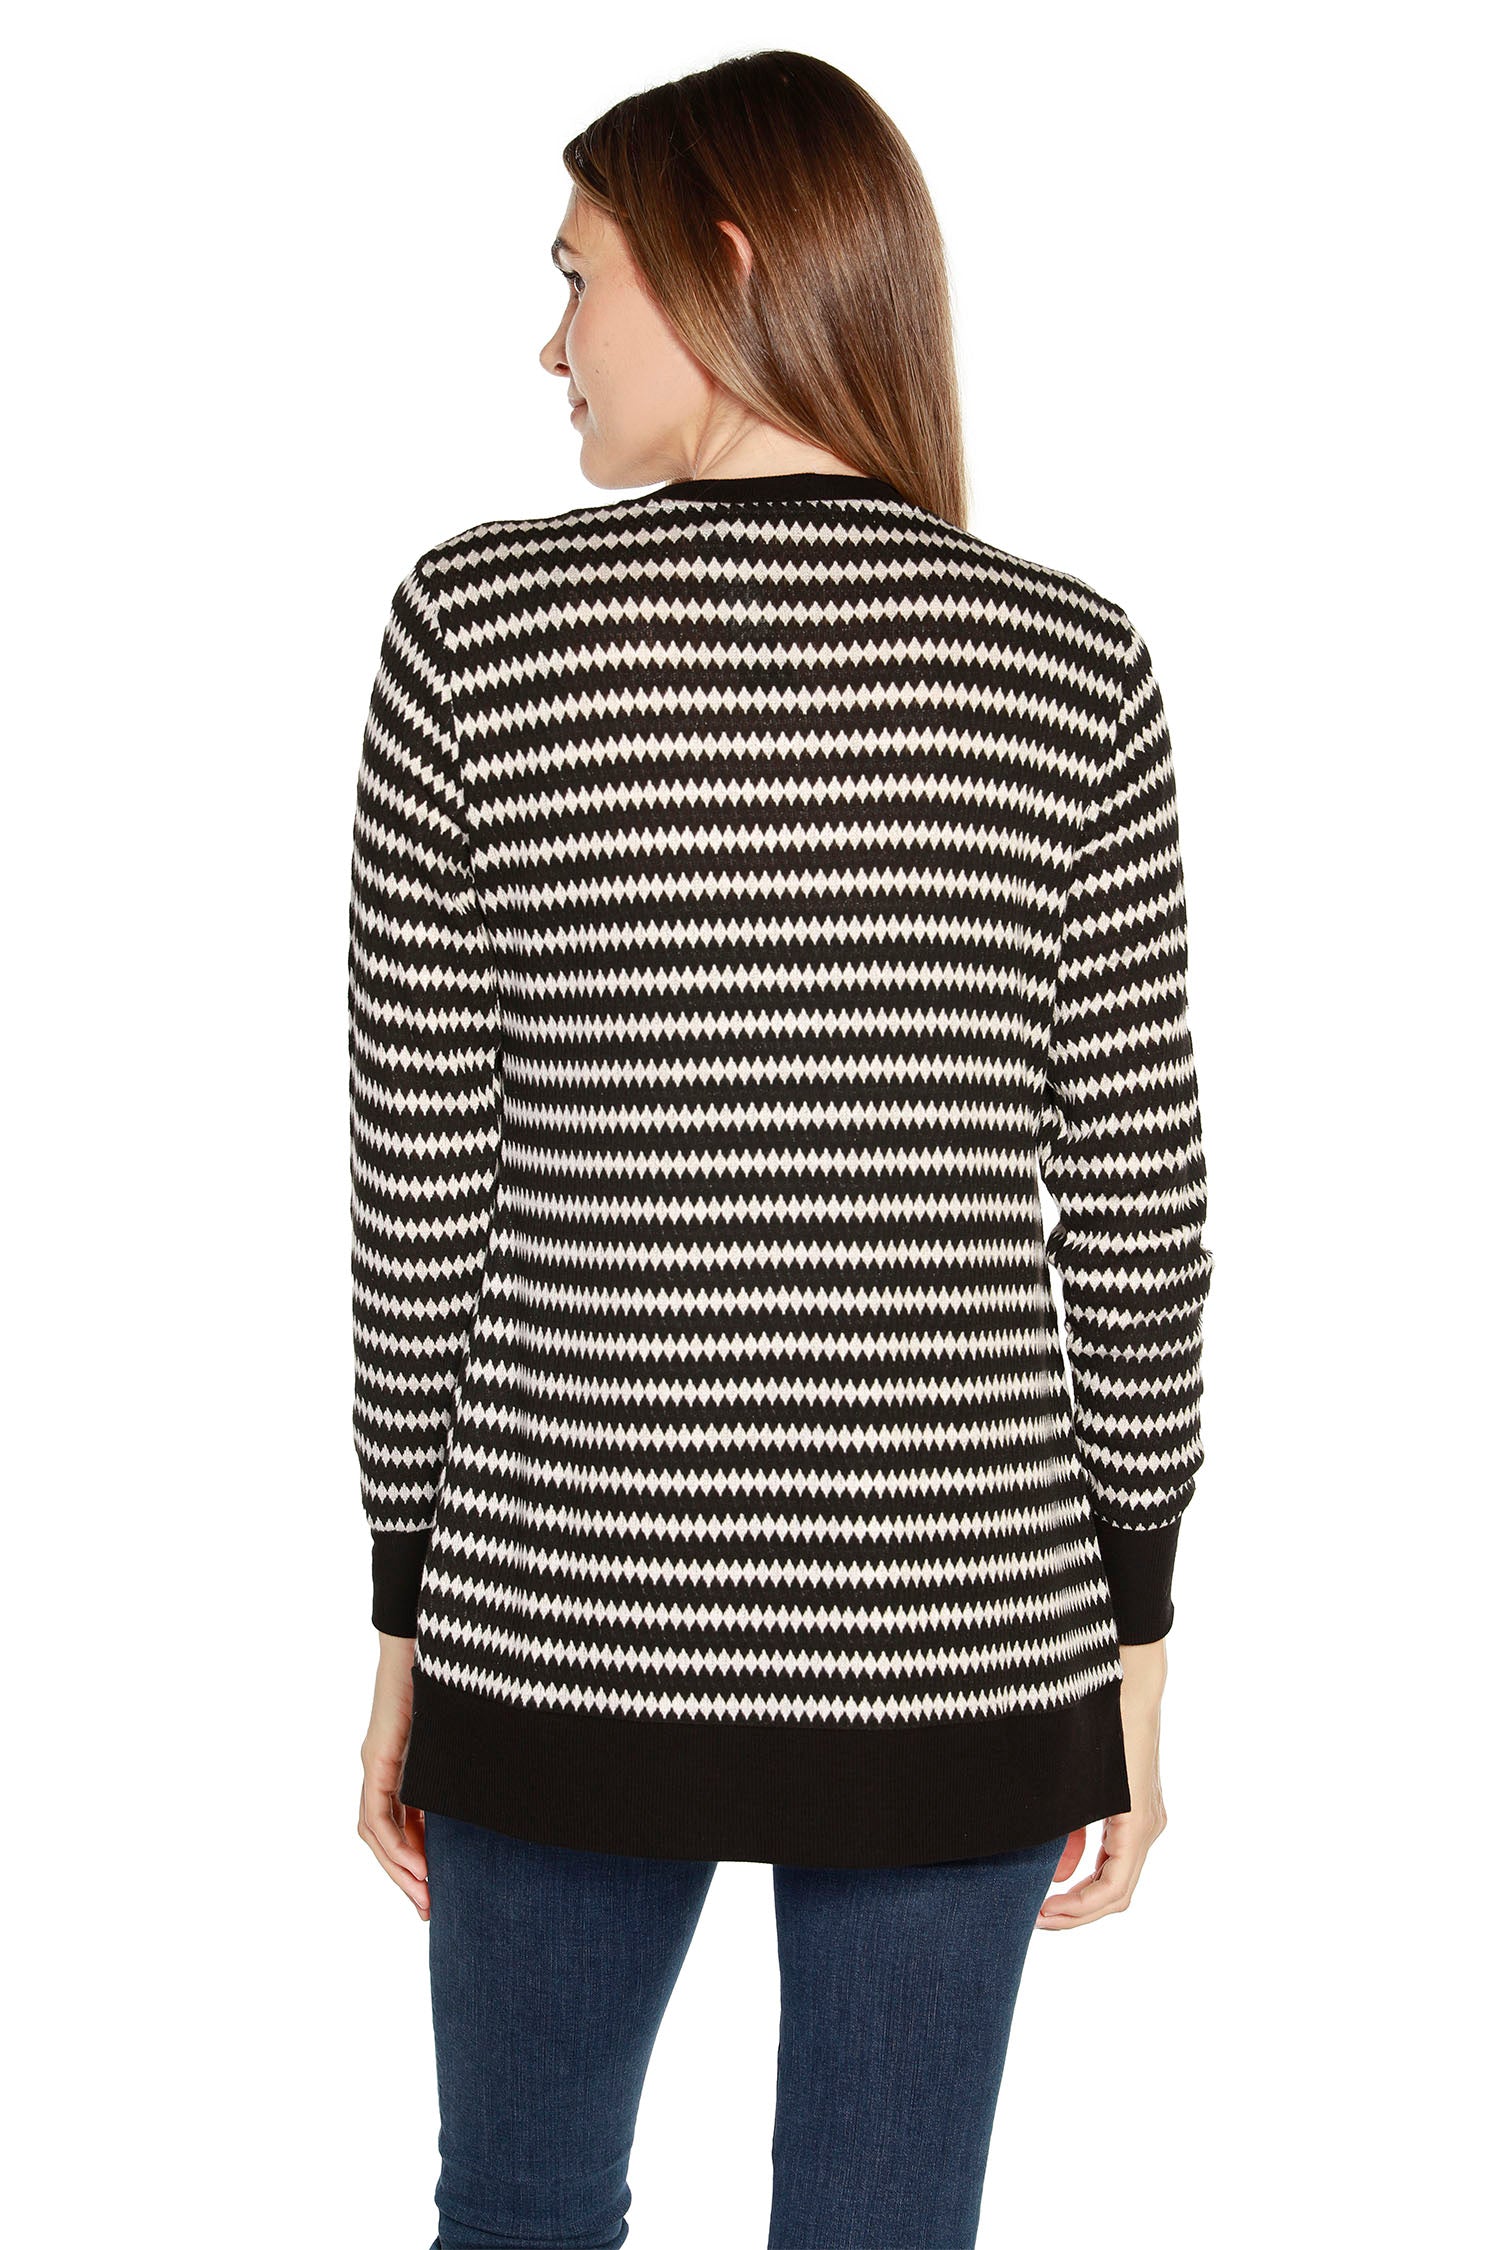 Women's Lightweight Open Front Cardigan with Zig-Zag Striping